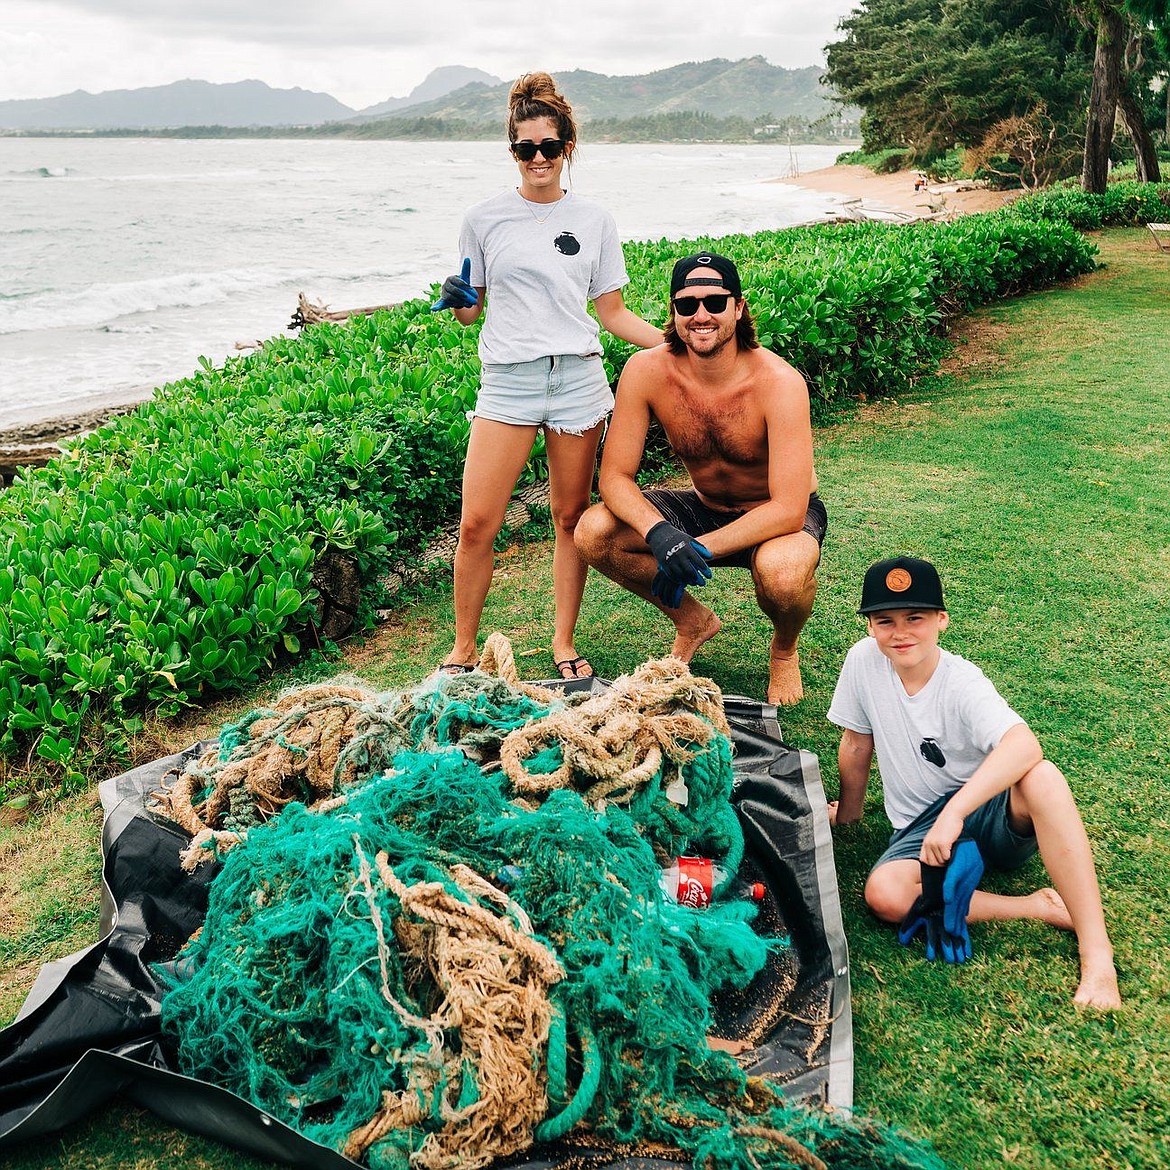 On a camping trip to Kauai last December, the Cederbloms and friends gathered more than 400 pounds of fishing debris. Pictured is Savannah McVay, Clint Crow and Landon Cederblom. “I’m trying to show him that not only do we have to take care of our hometown but we have to take care of the places we go as well,” said Weston Cederblom. (Courtesy photos)